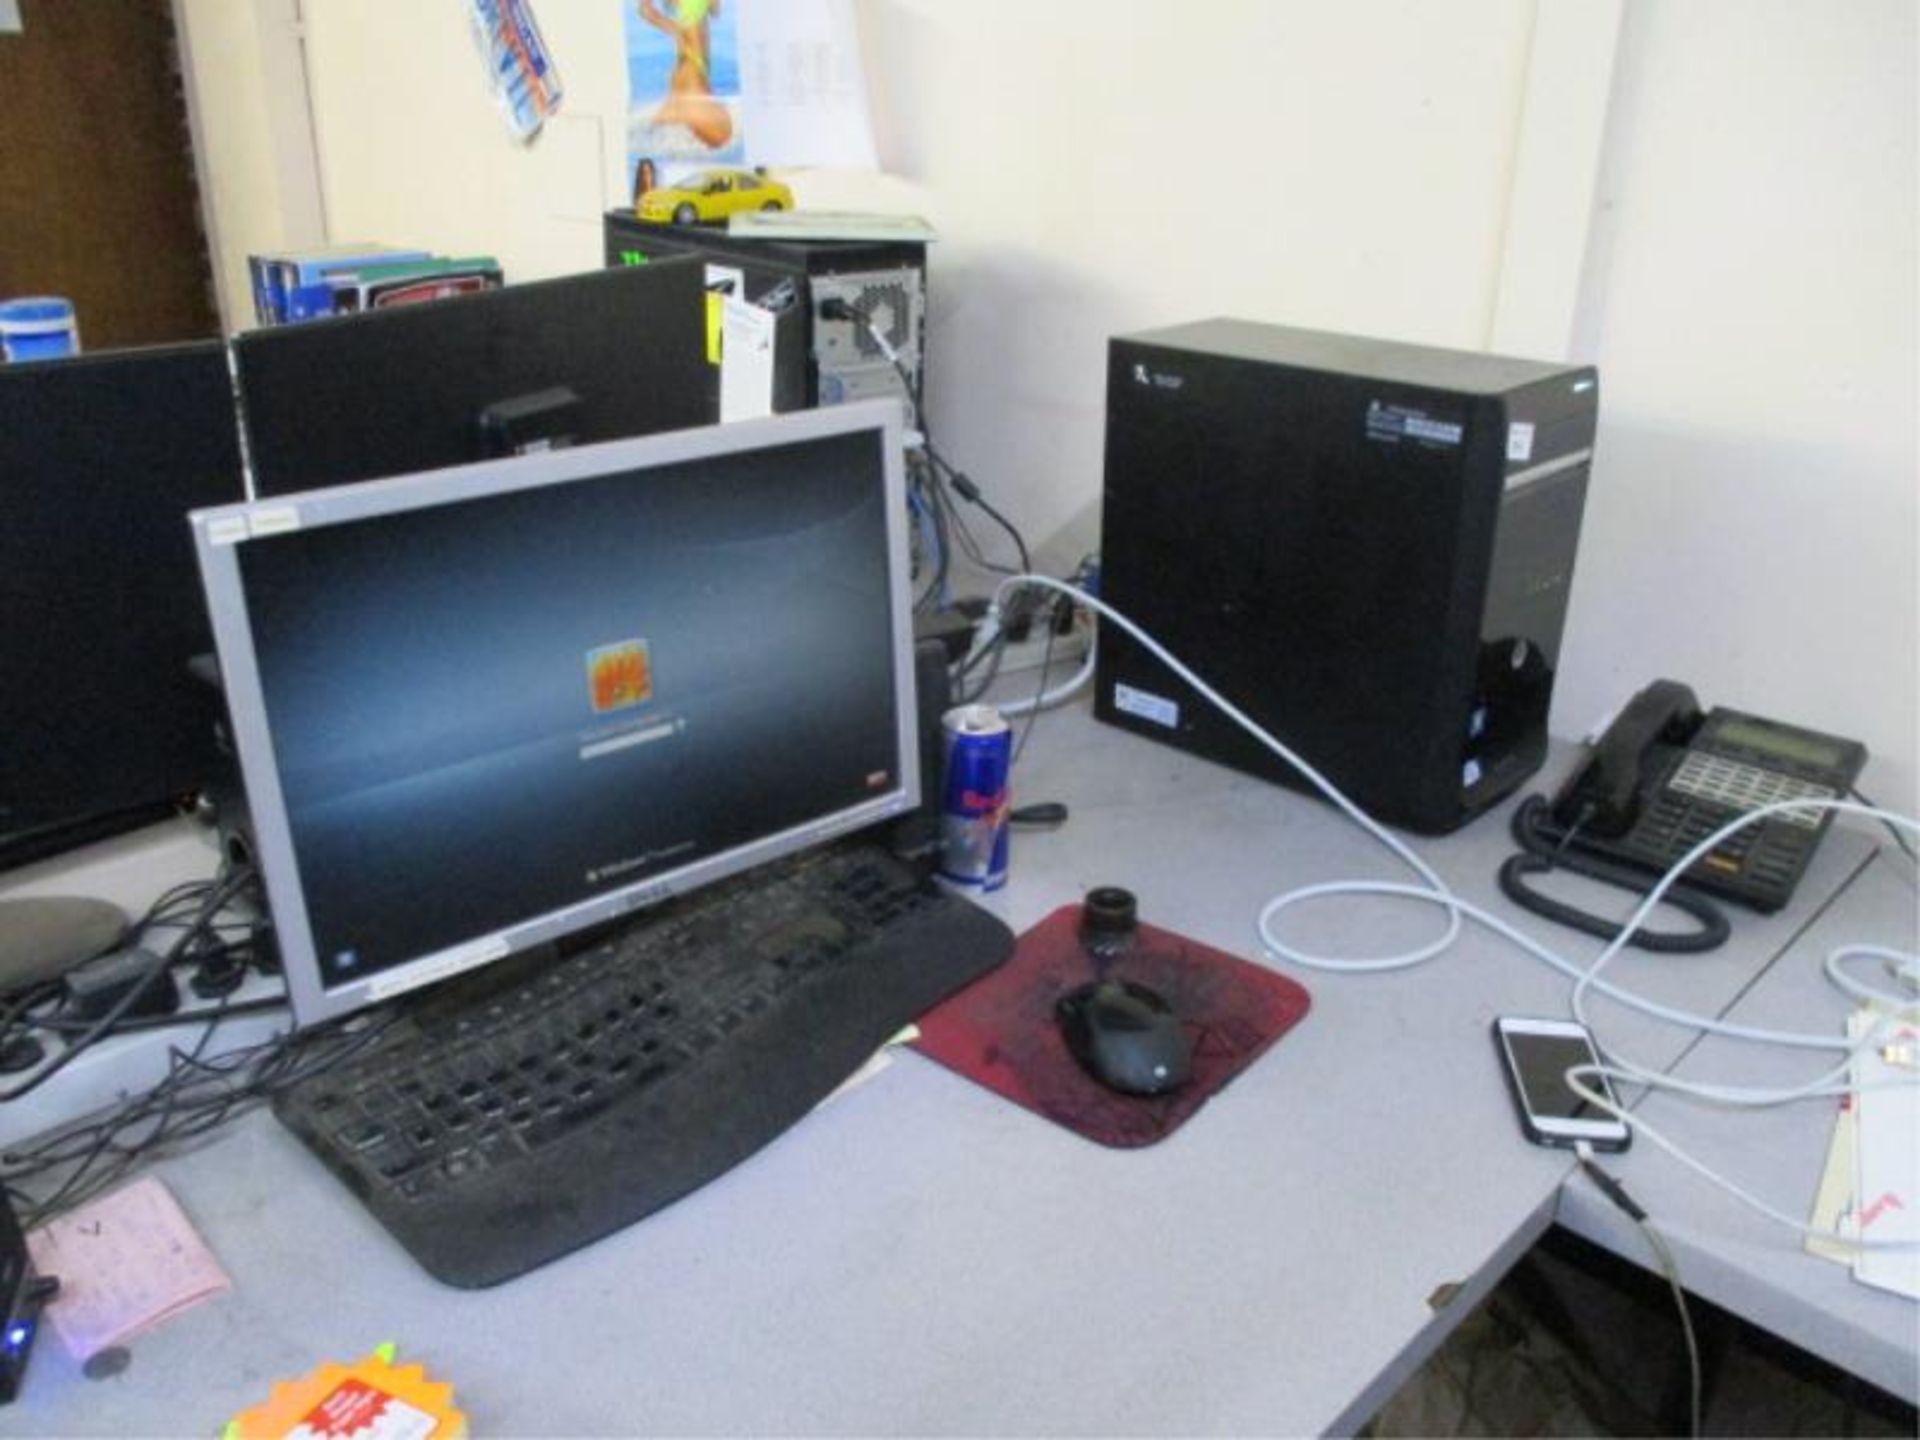 HP Pavilion PG Series, Windows 7 with 19 in Flat Screen monitor